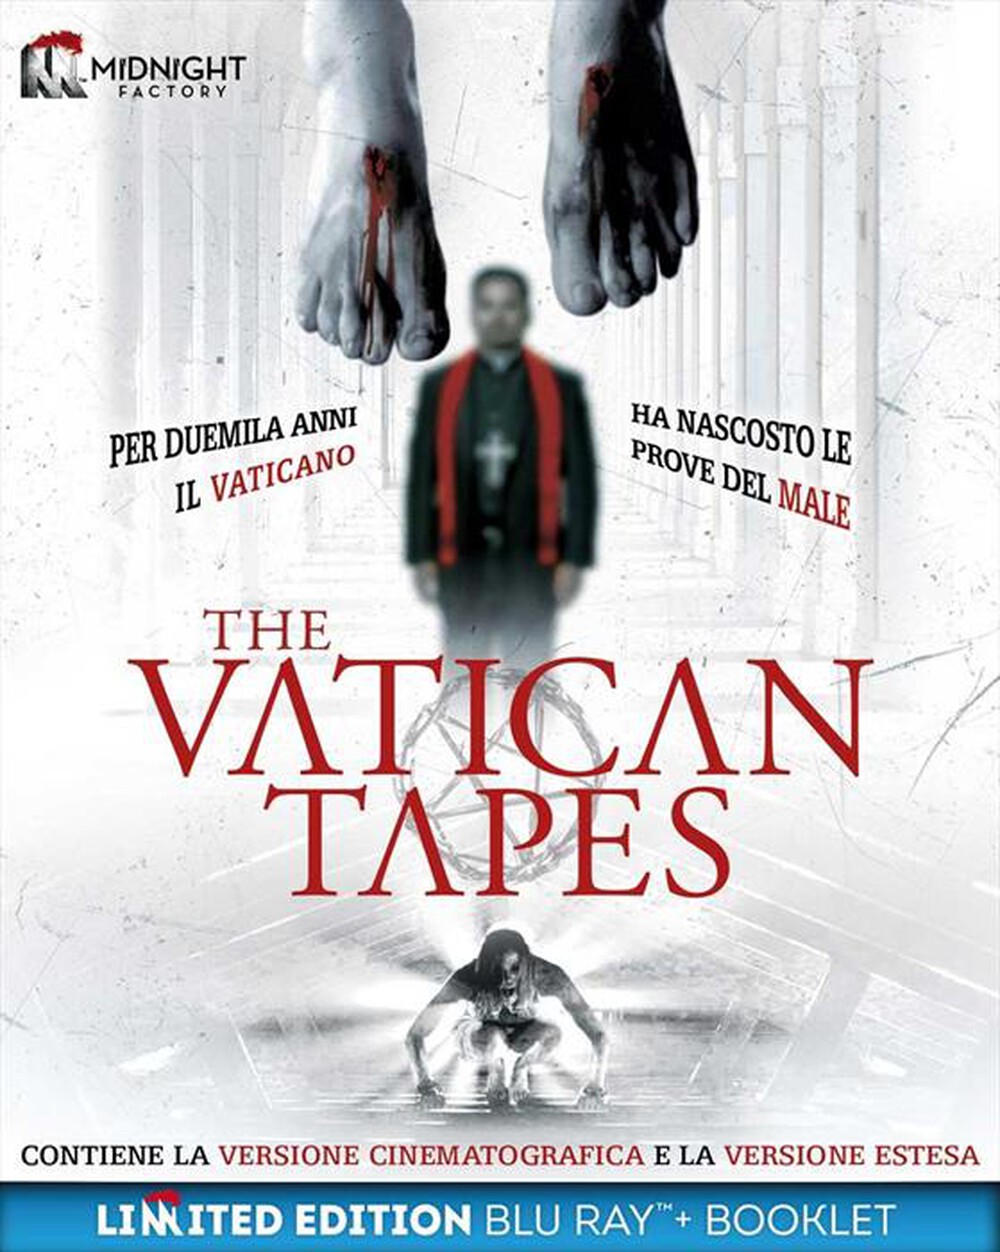 "Midnight Factory - Vatican Tapes (The) (Ltd) (Blu-Ray+Booklet)"